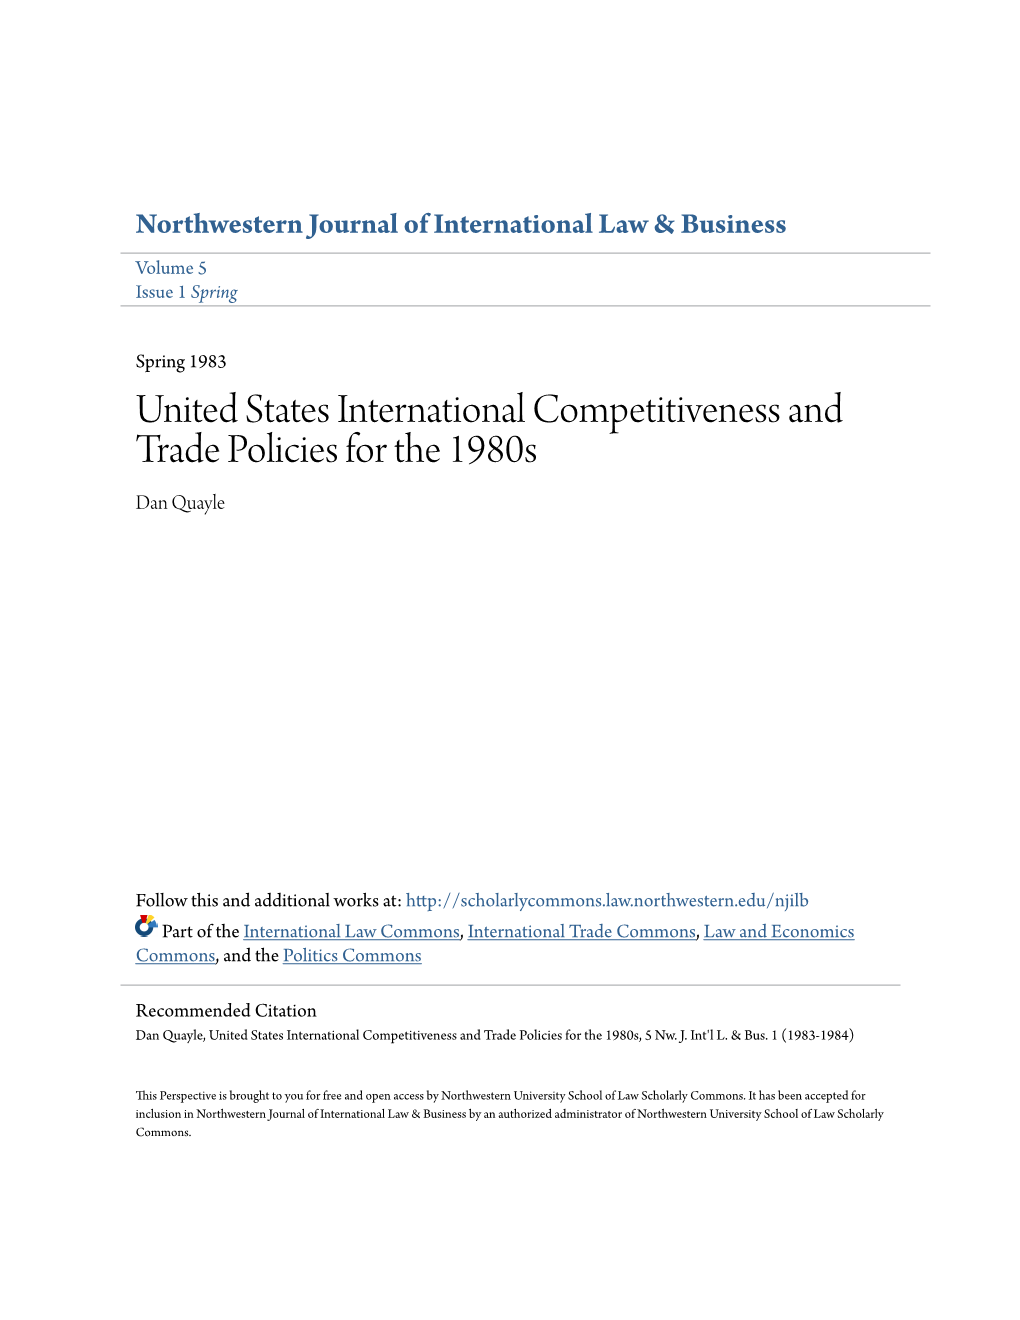 United States International Competitiveness and Trade Policies for the 1980S Dan Quayle